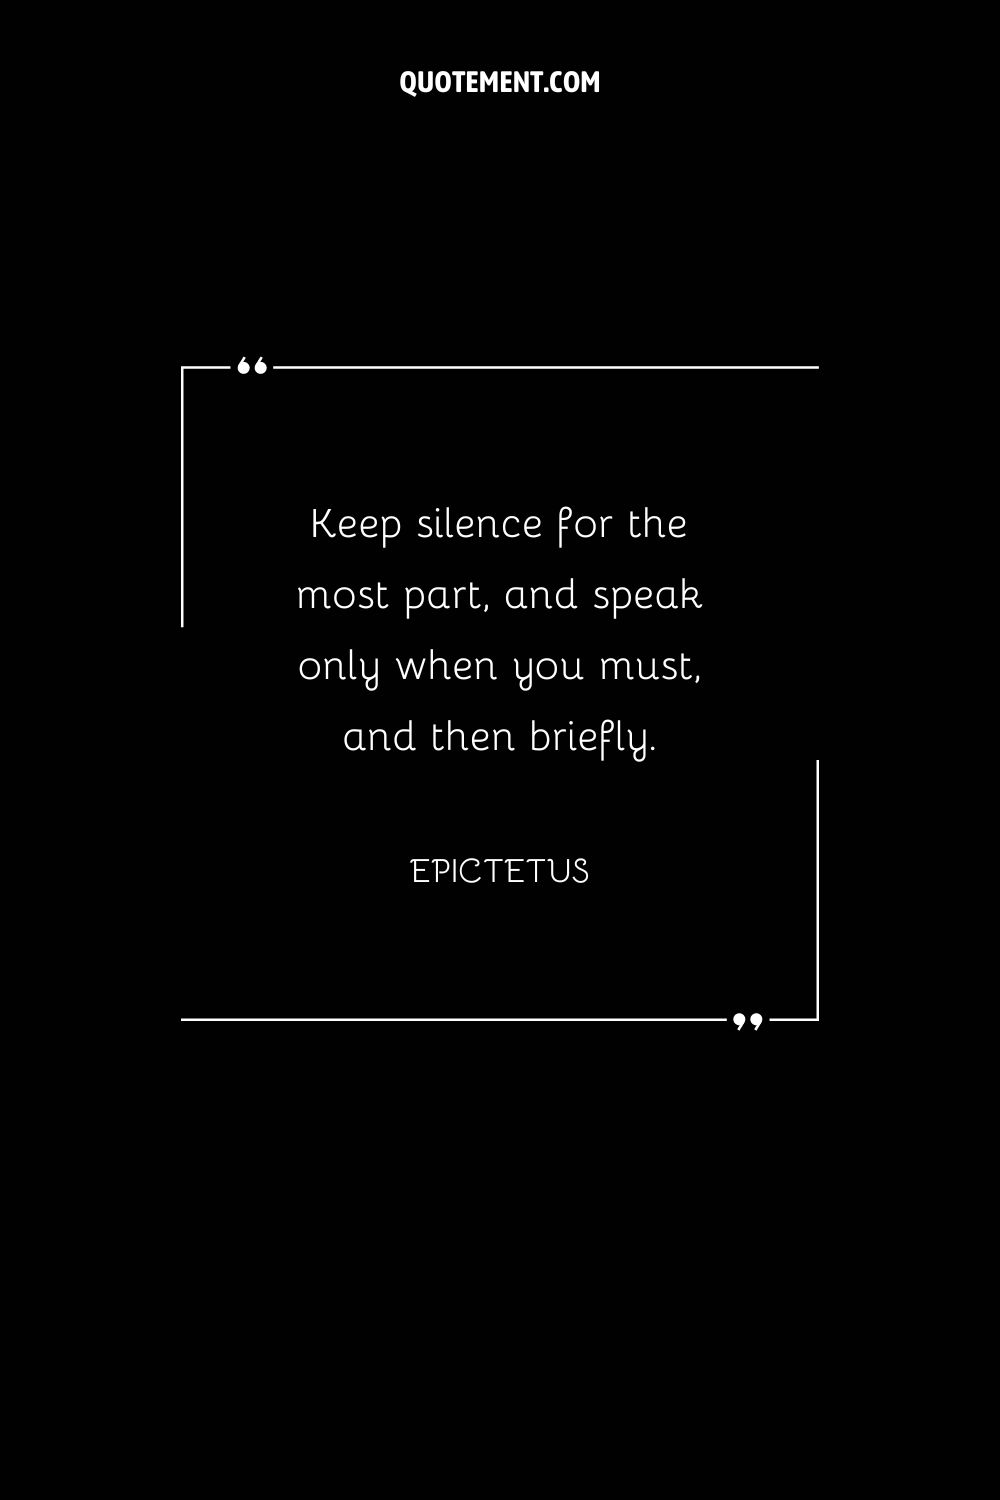 Keep silence for the most part, and speak only when you must, and then briefly